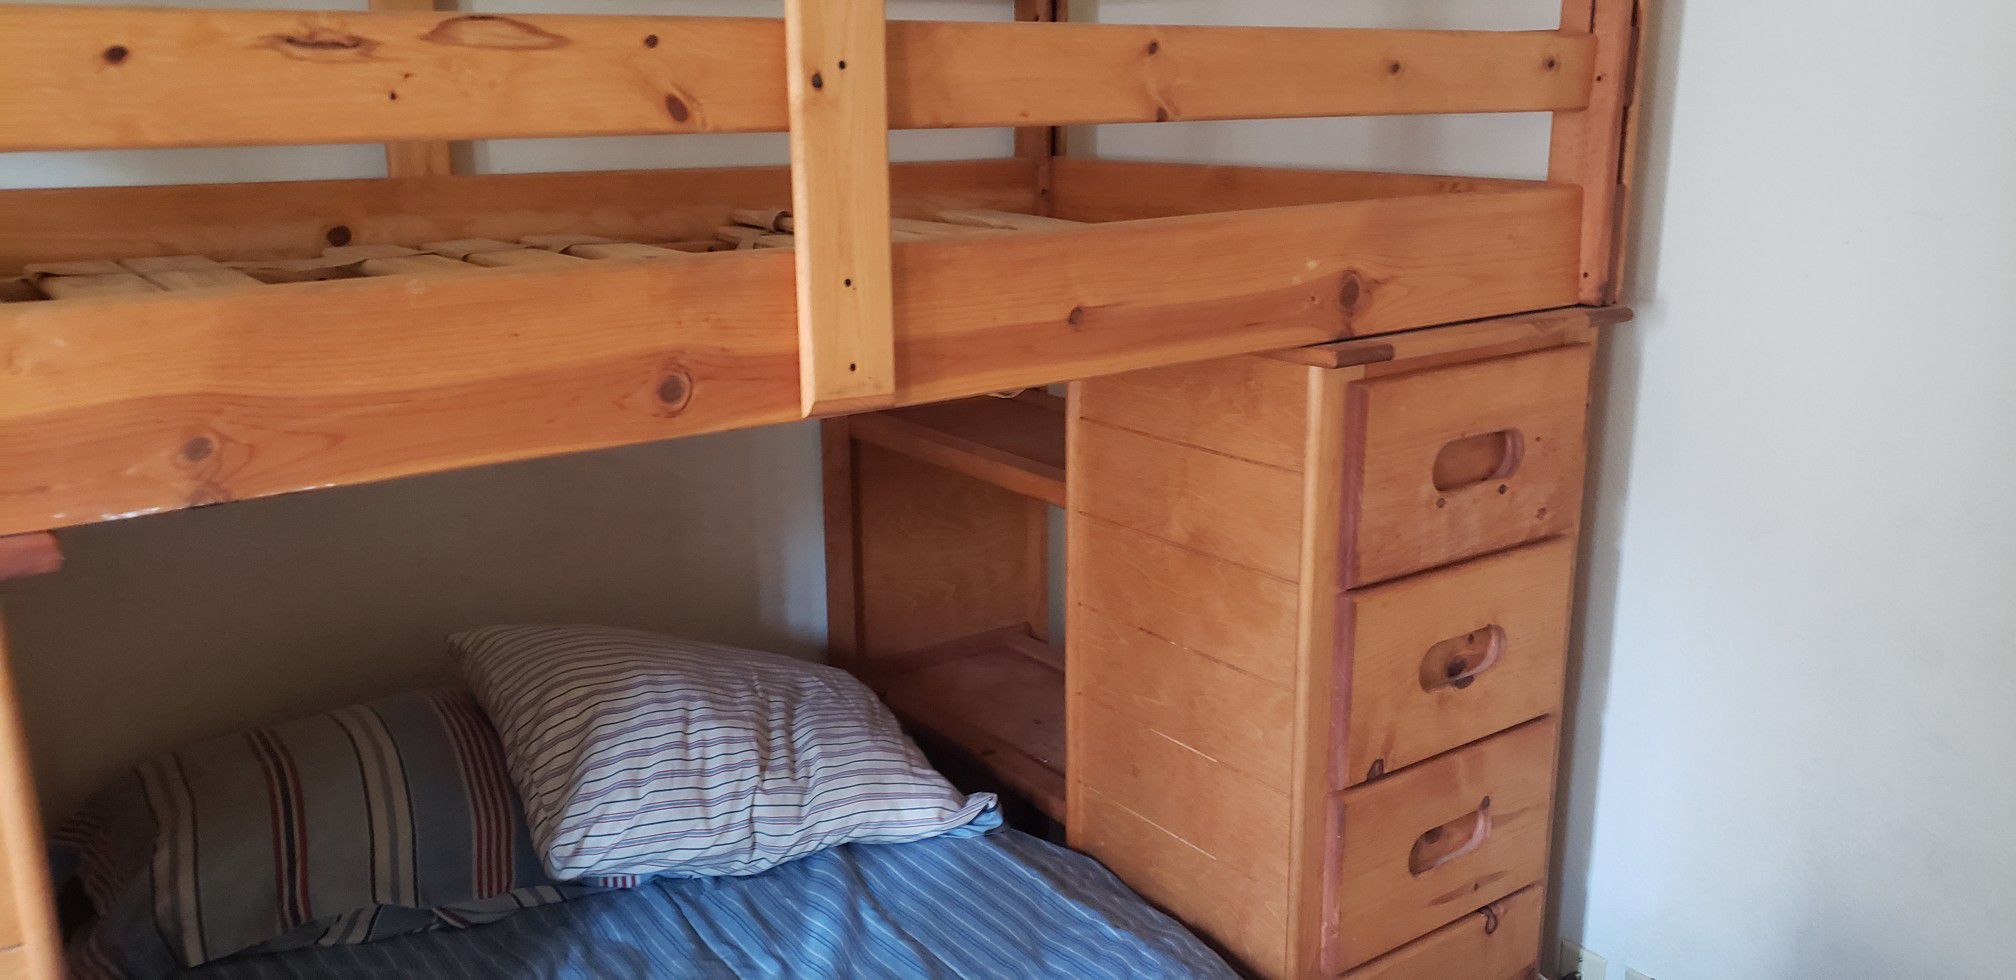 Bunk bed with built in desk, dresser, TV stand, small tv